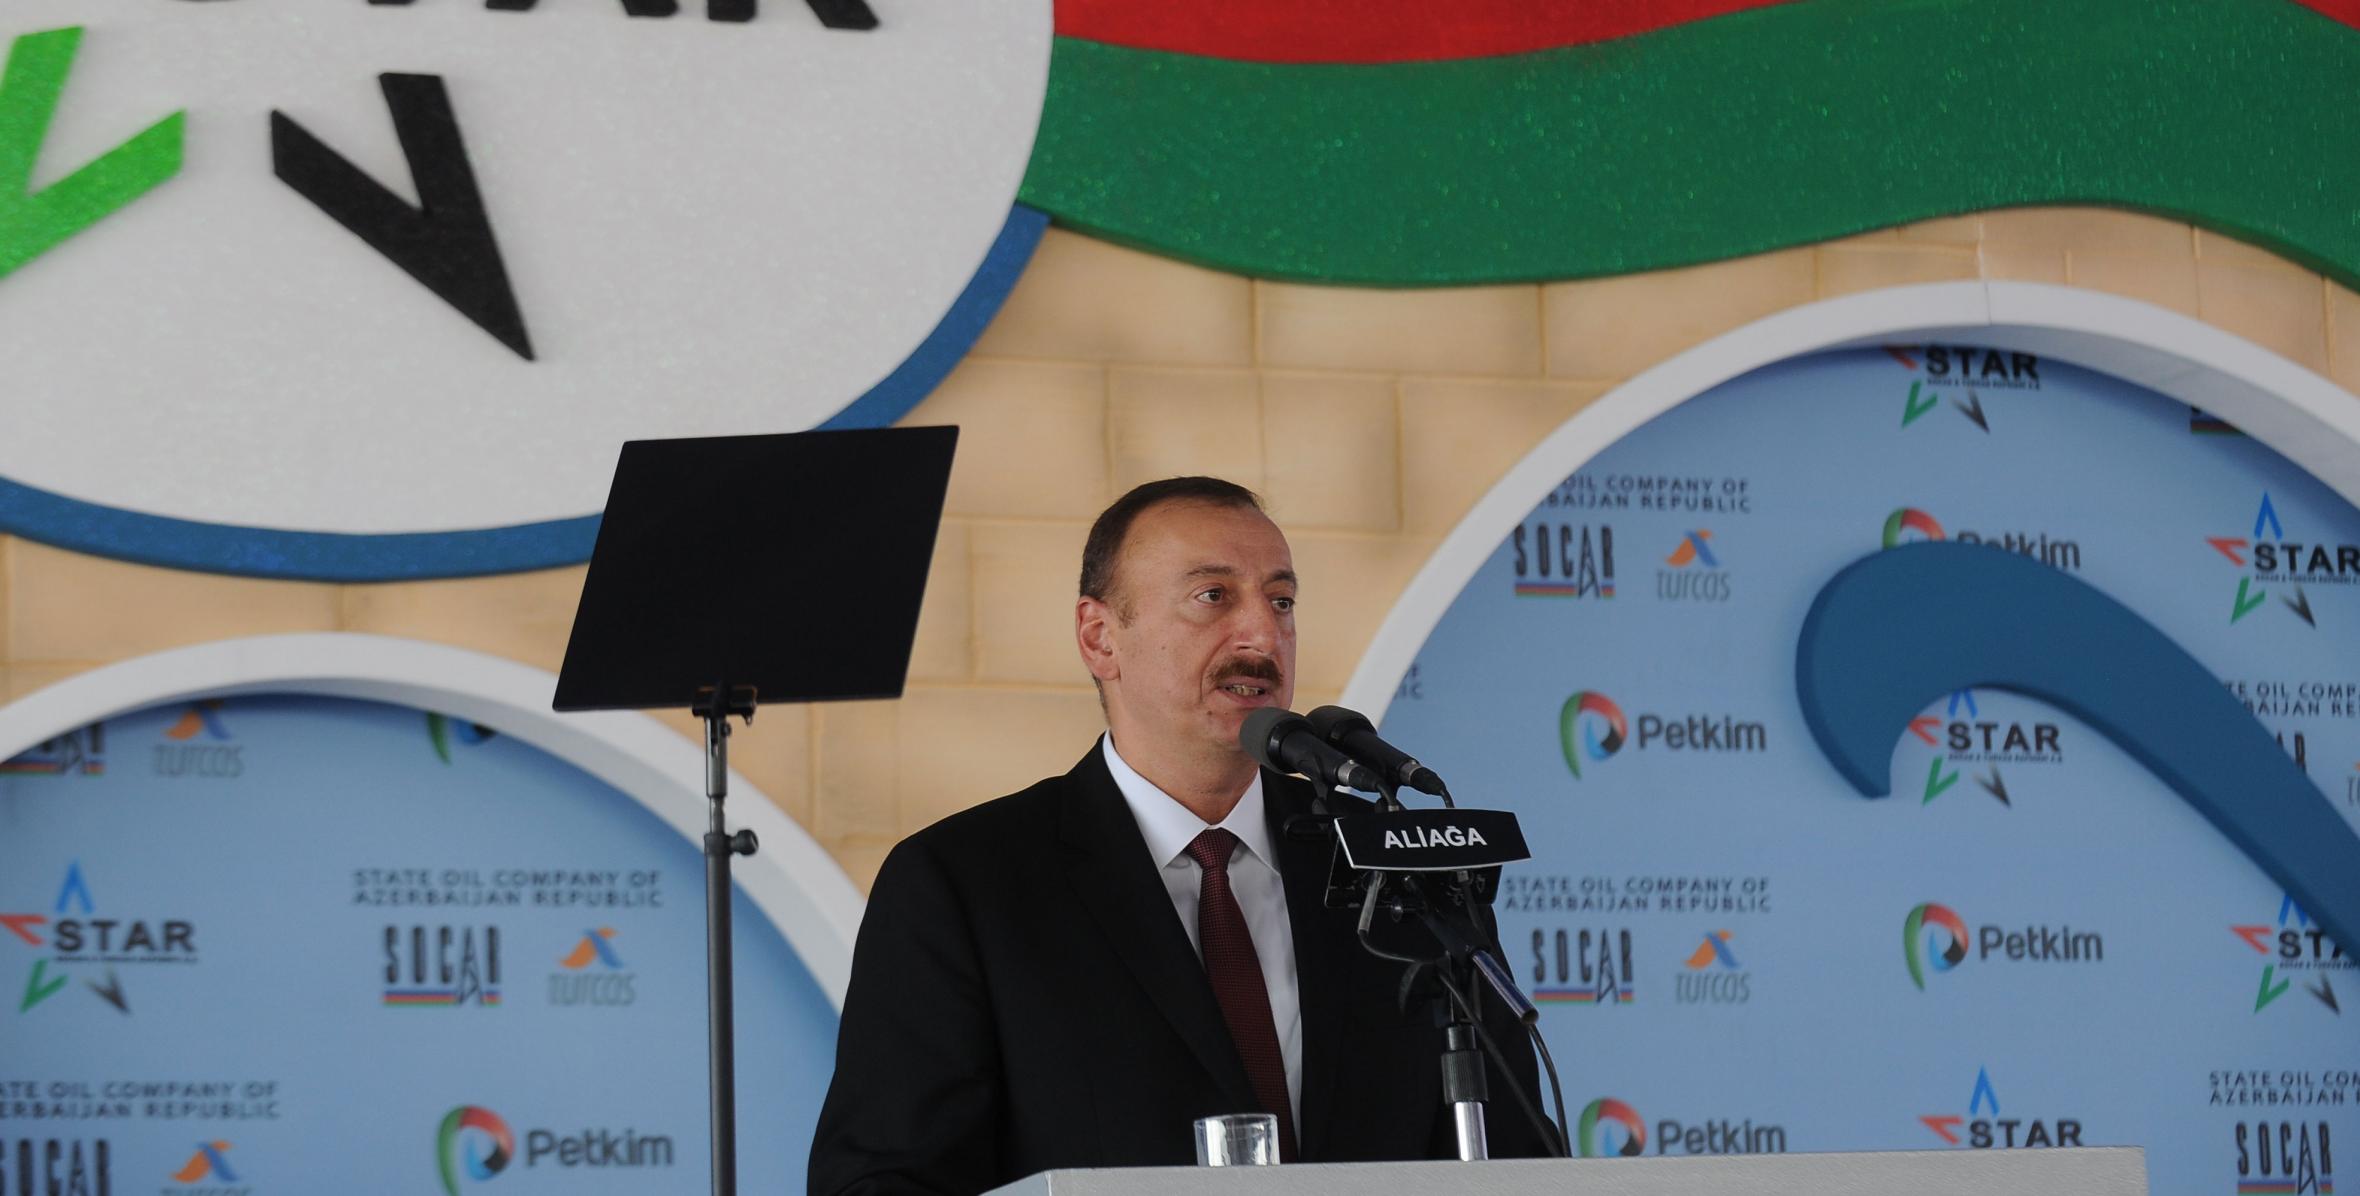 Speech by Ilham Aliyev at the foundation-laying ceremony for the Star refinery of Petkim